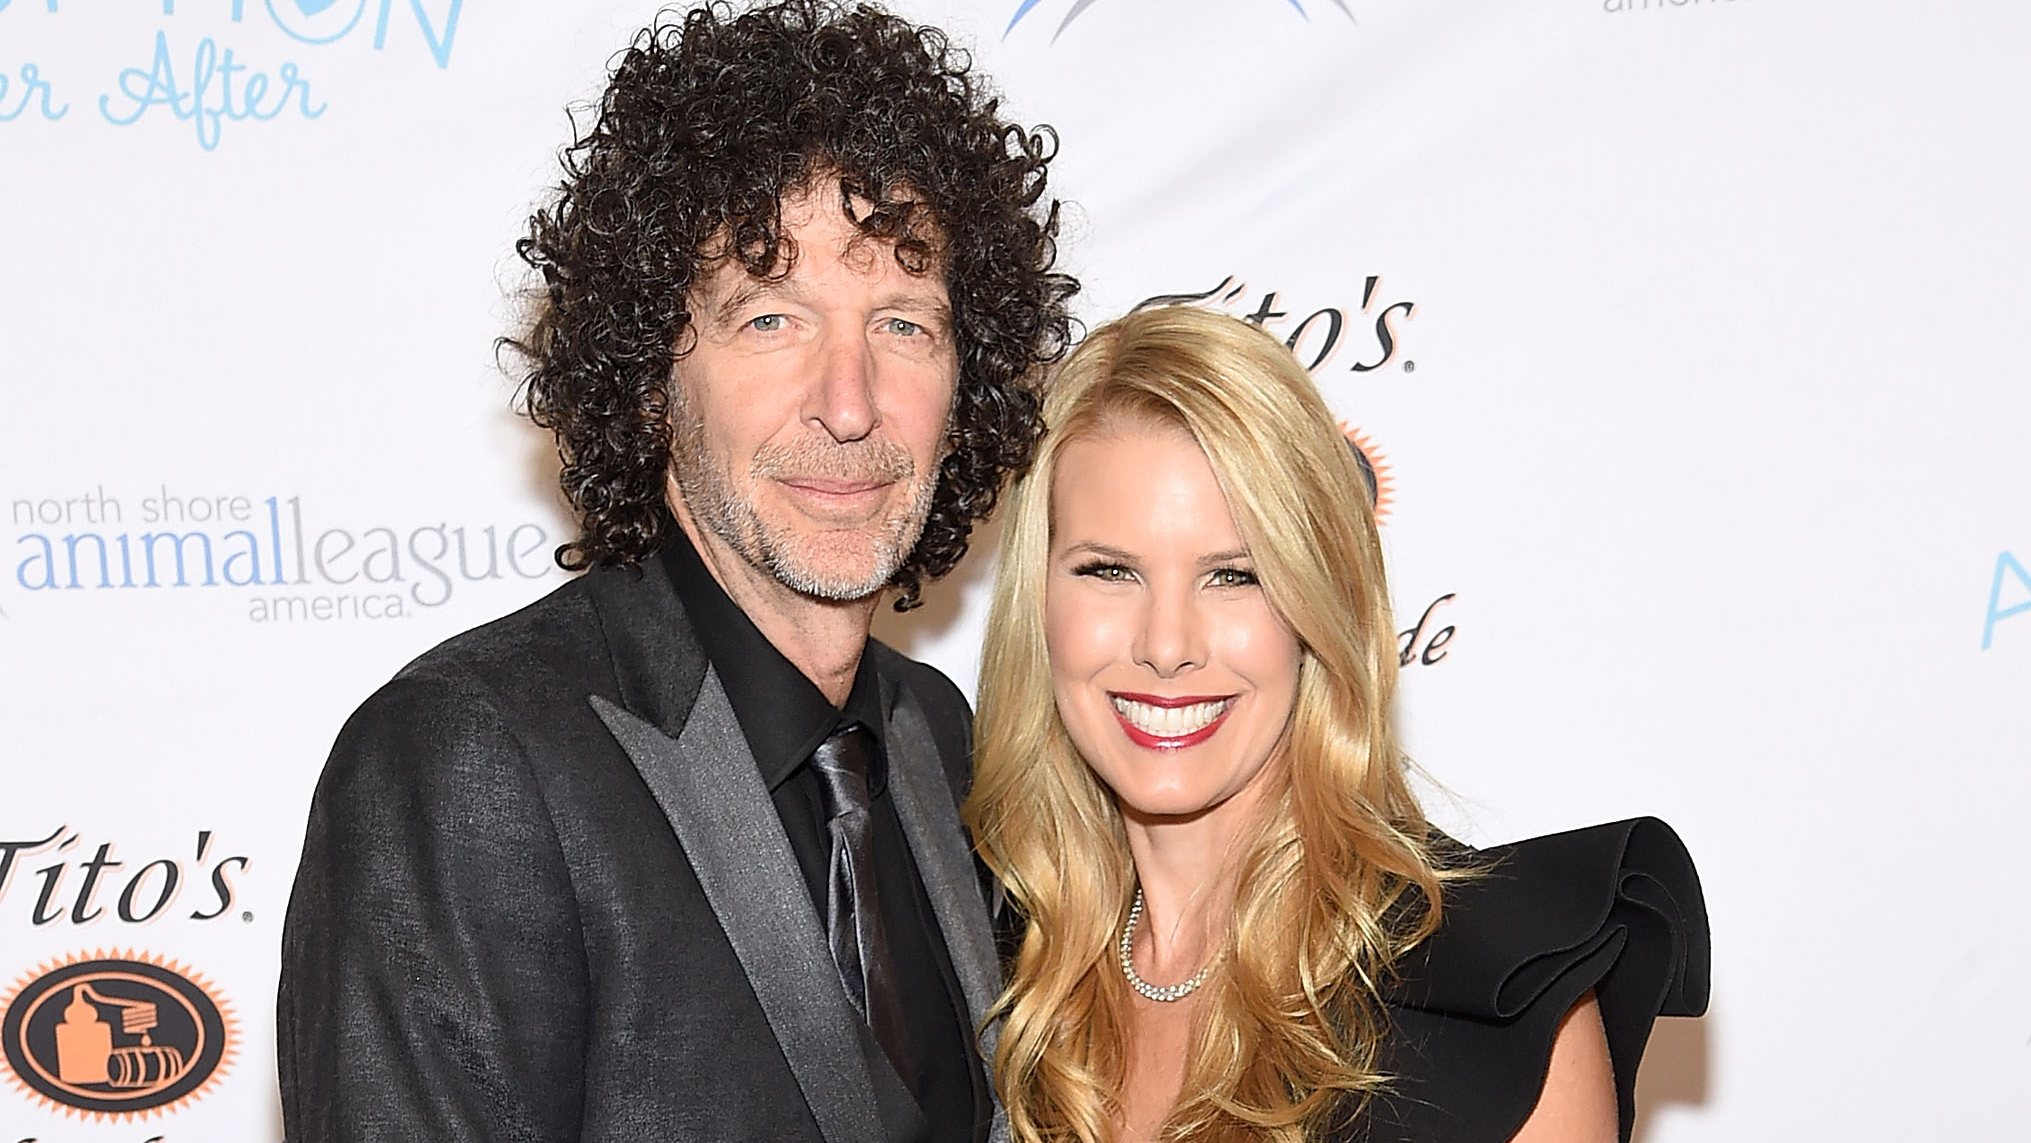 Howard Stern Gets Loving Message From Beth On Their Anniversary